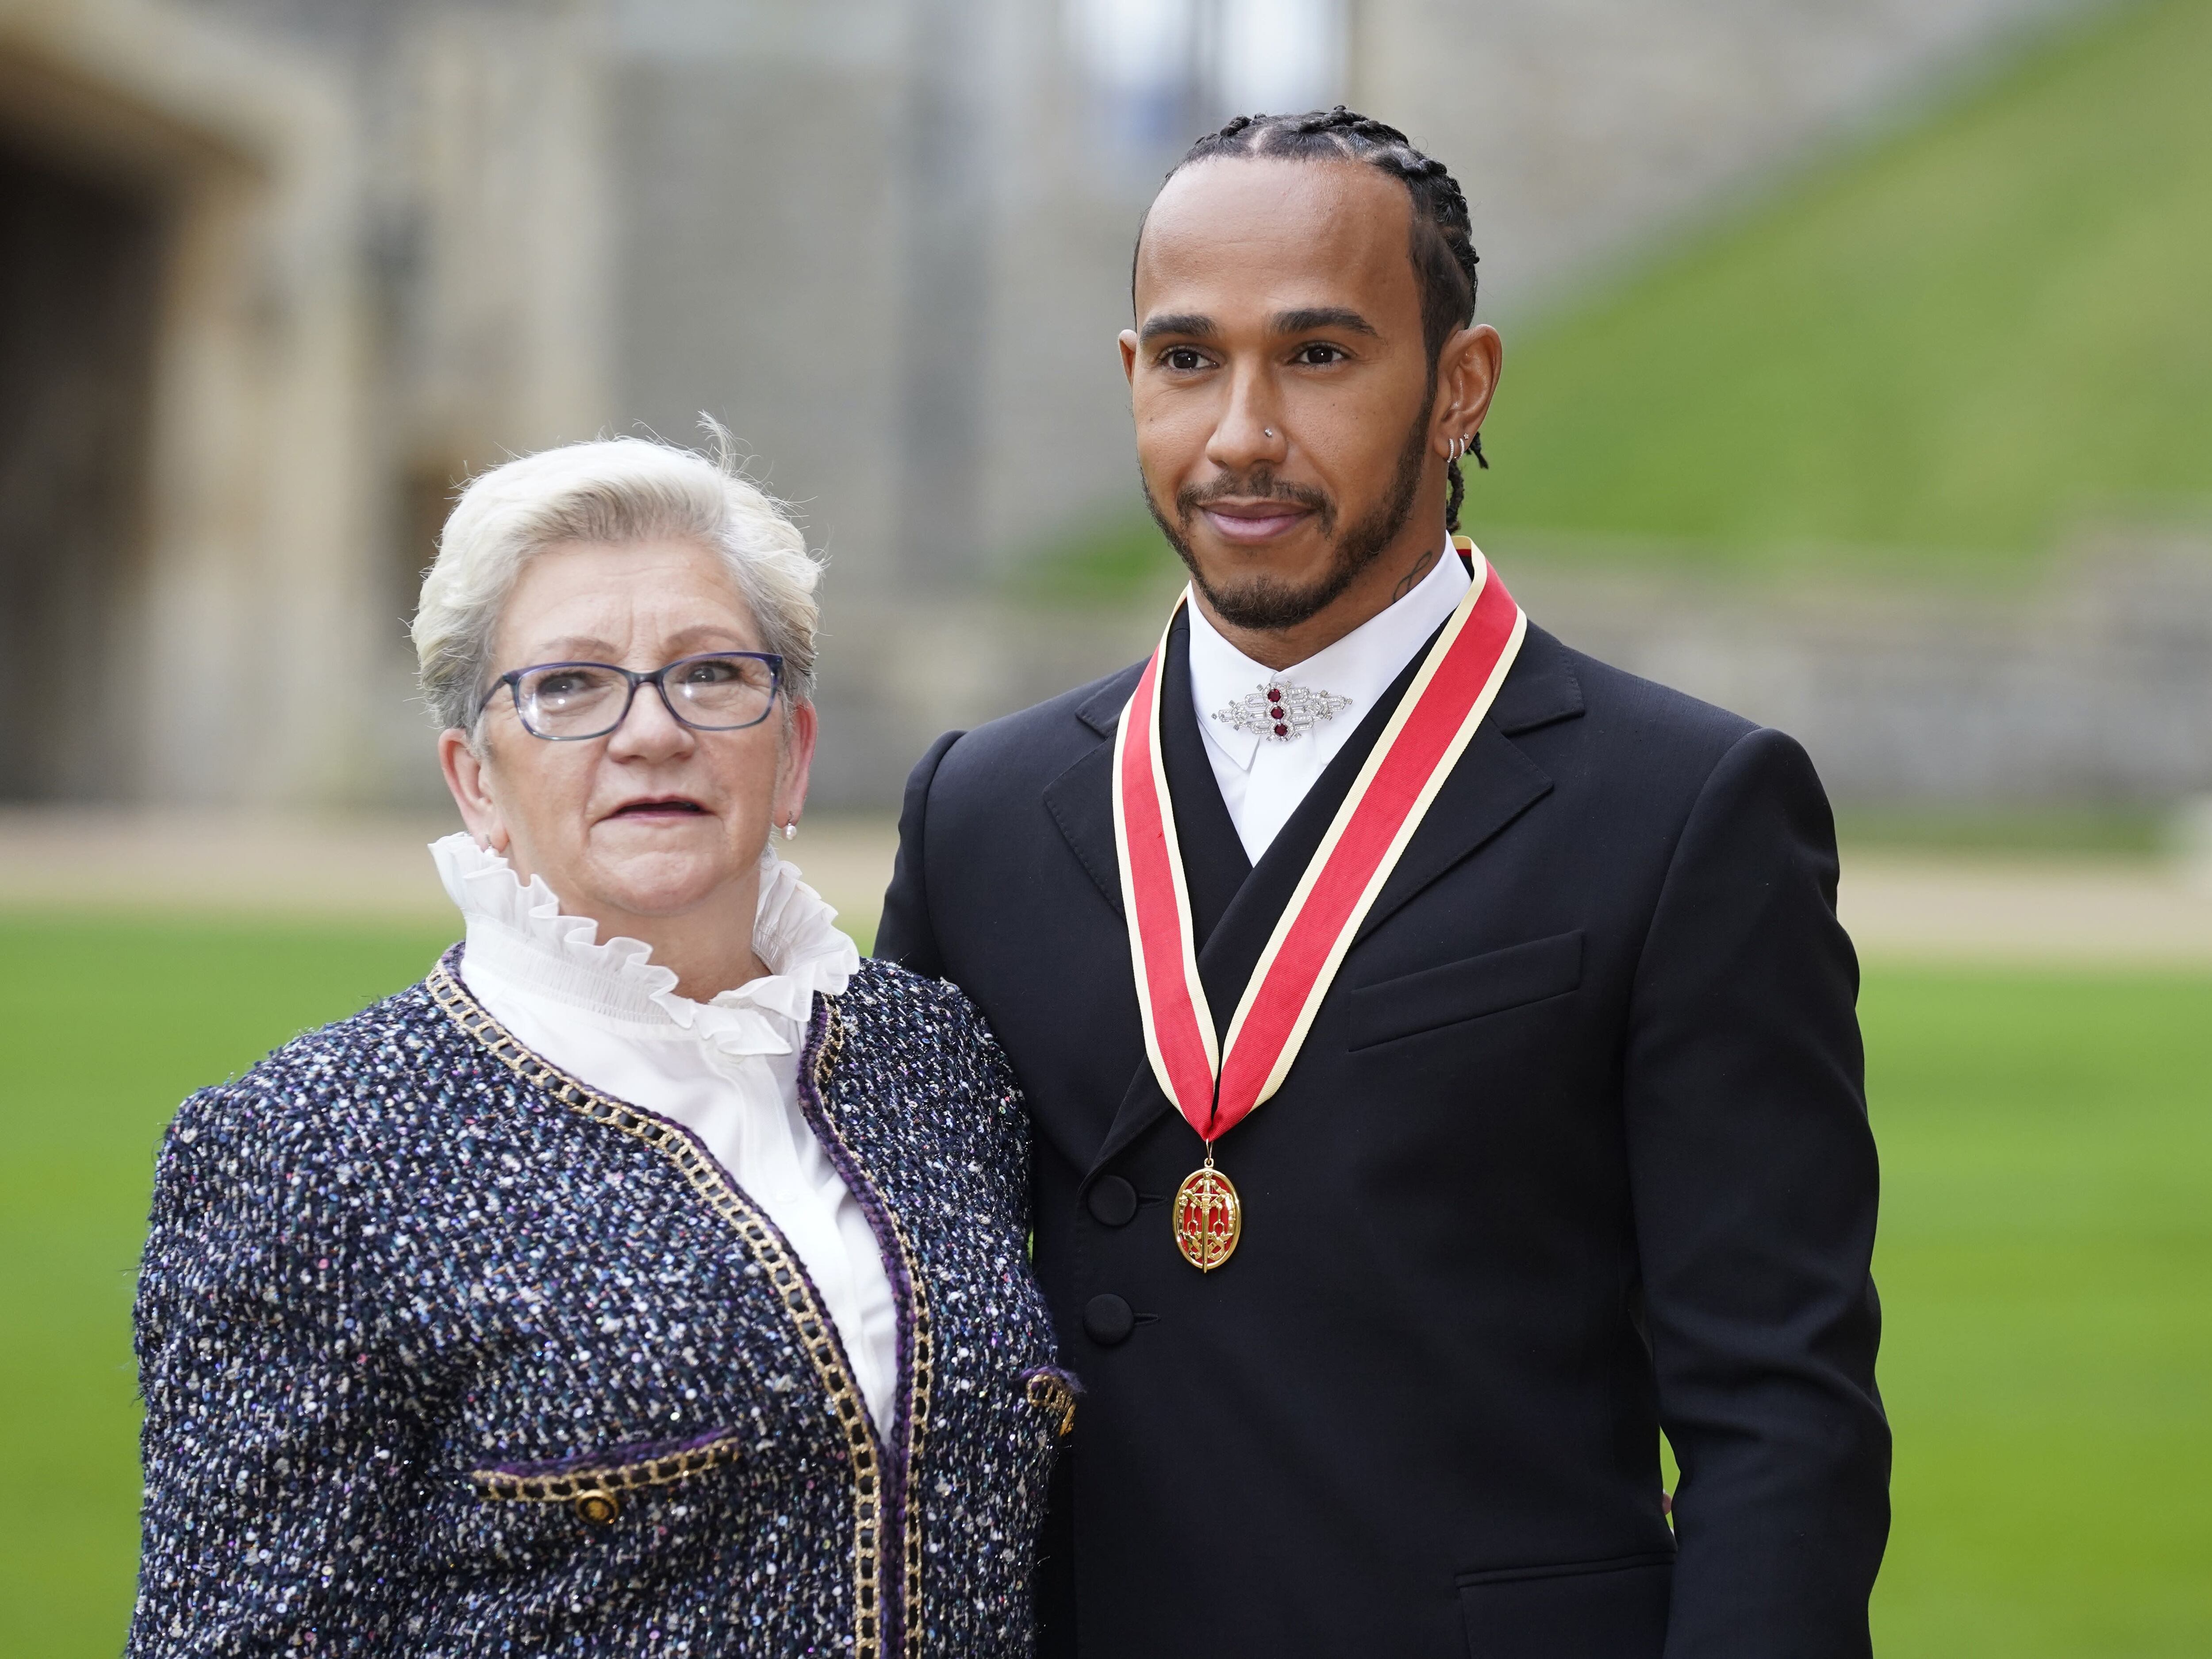 Lewis Hamilton to add mother’s surname Larbalestier as additional middle name